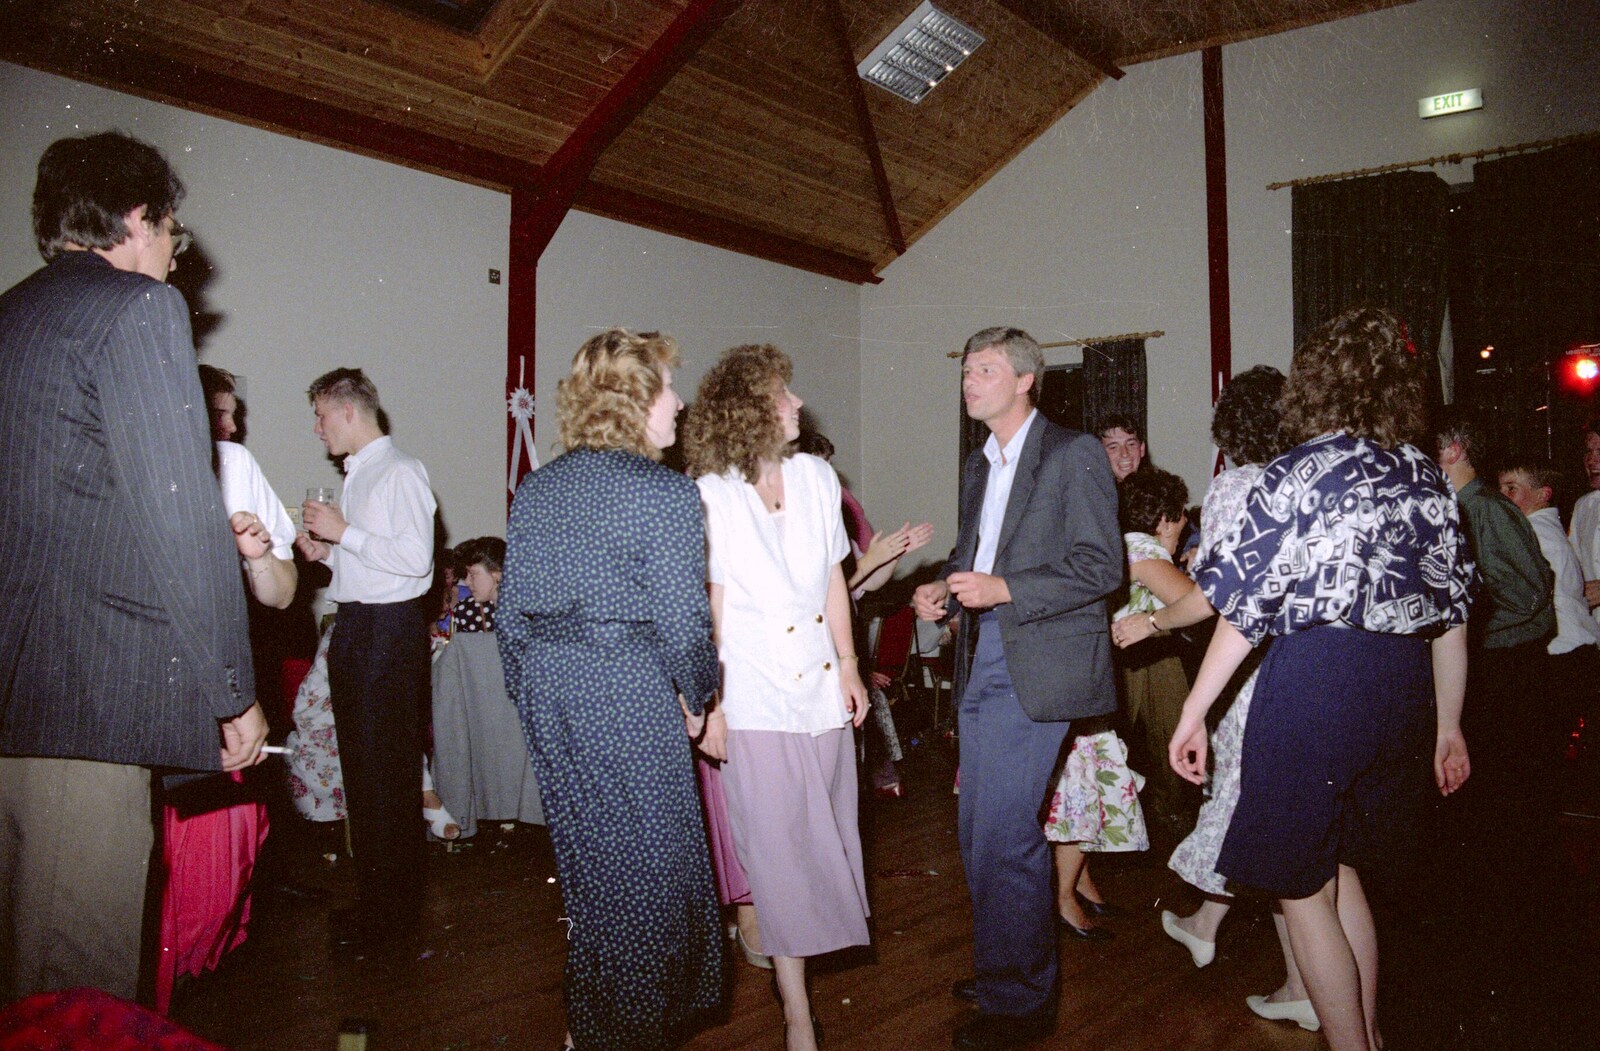 Steve-o gets his funkiest dance moves on from Printec Kelly's Wedding, Eye, Suffolk - 25th April 1992